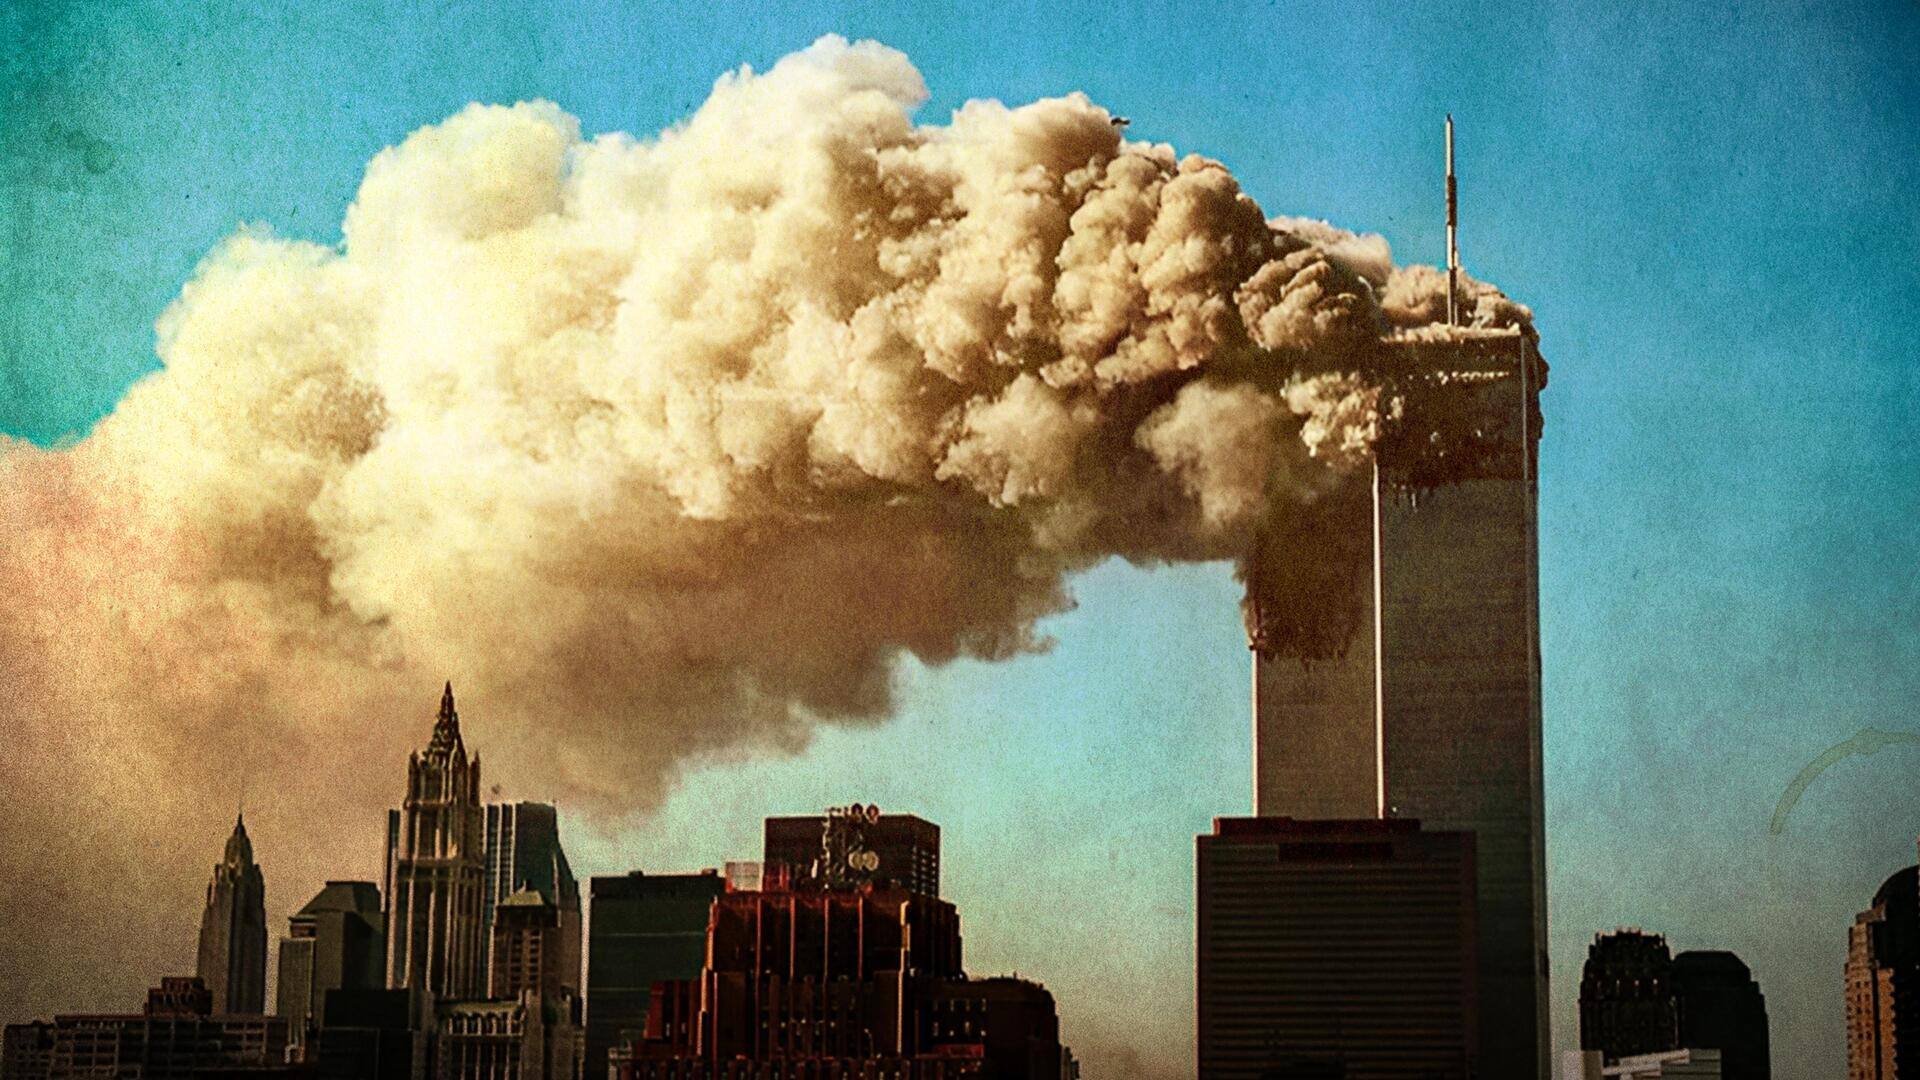 Must-watch documentaries on the tragic 9/11 attacks